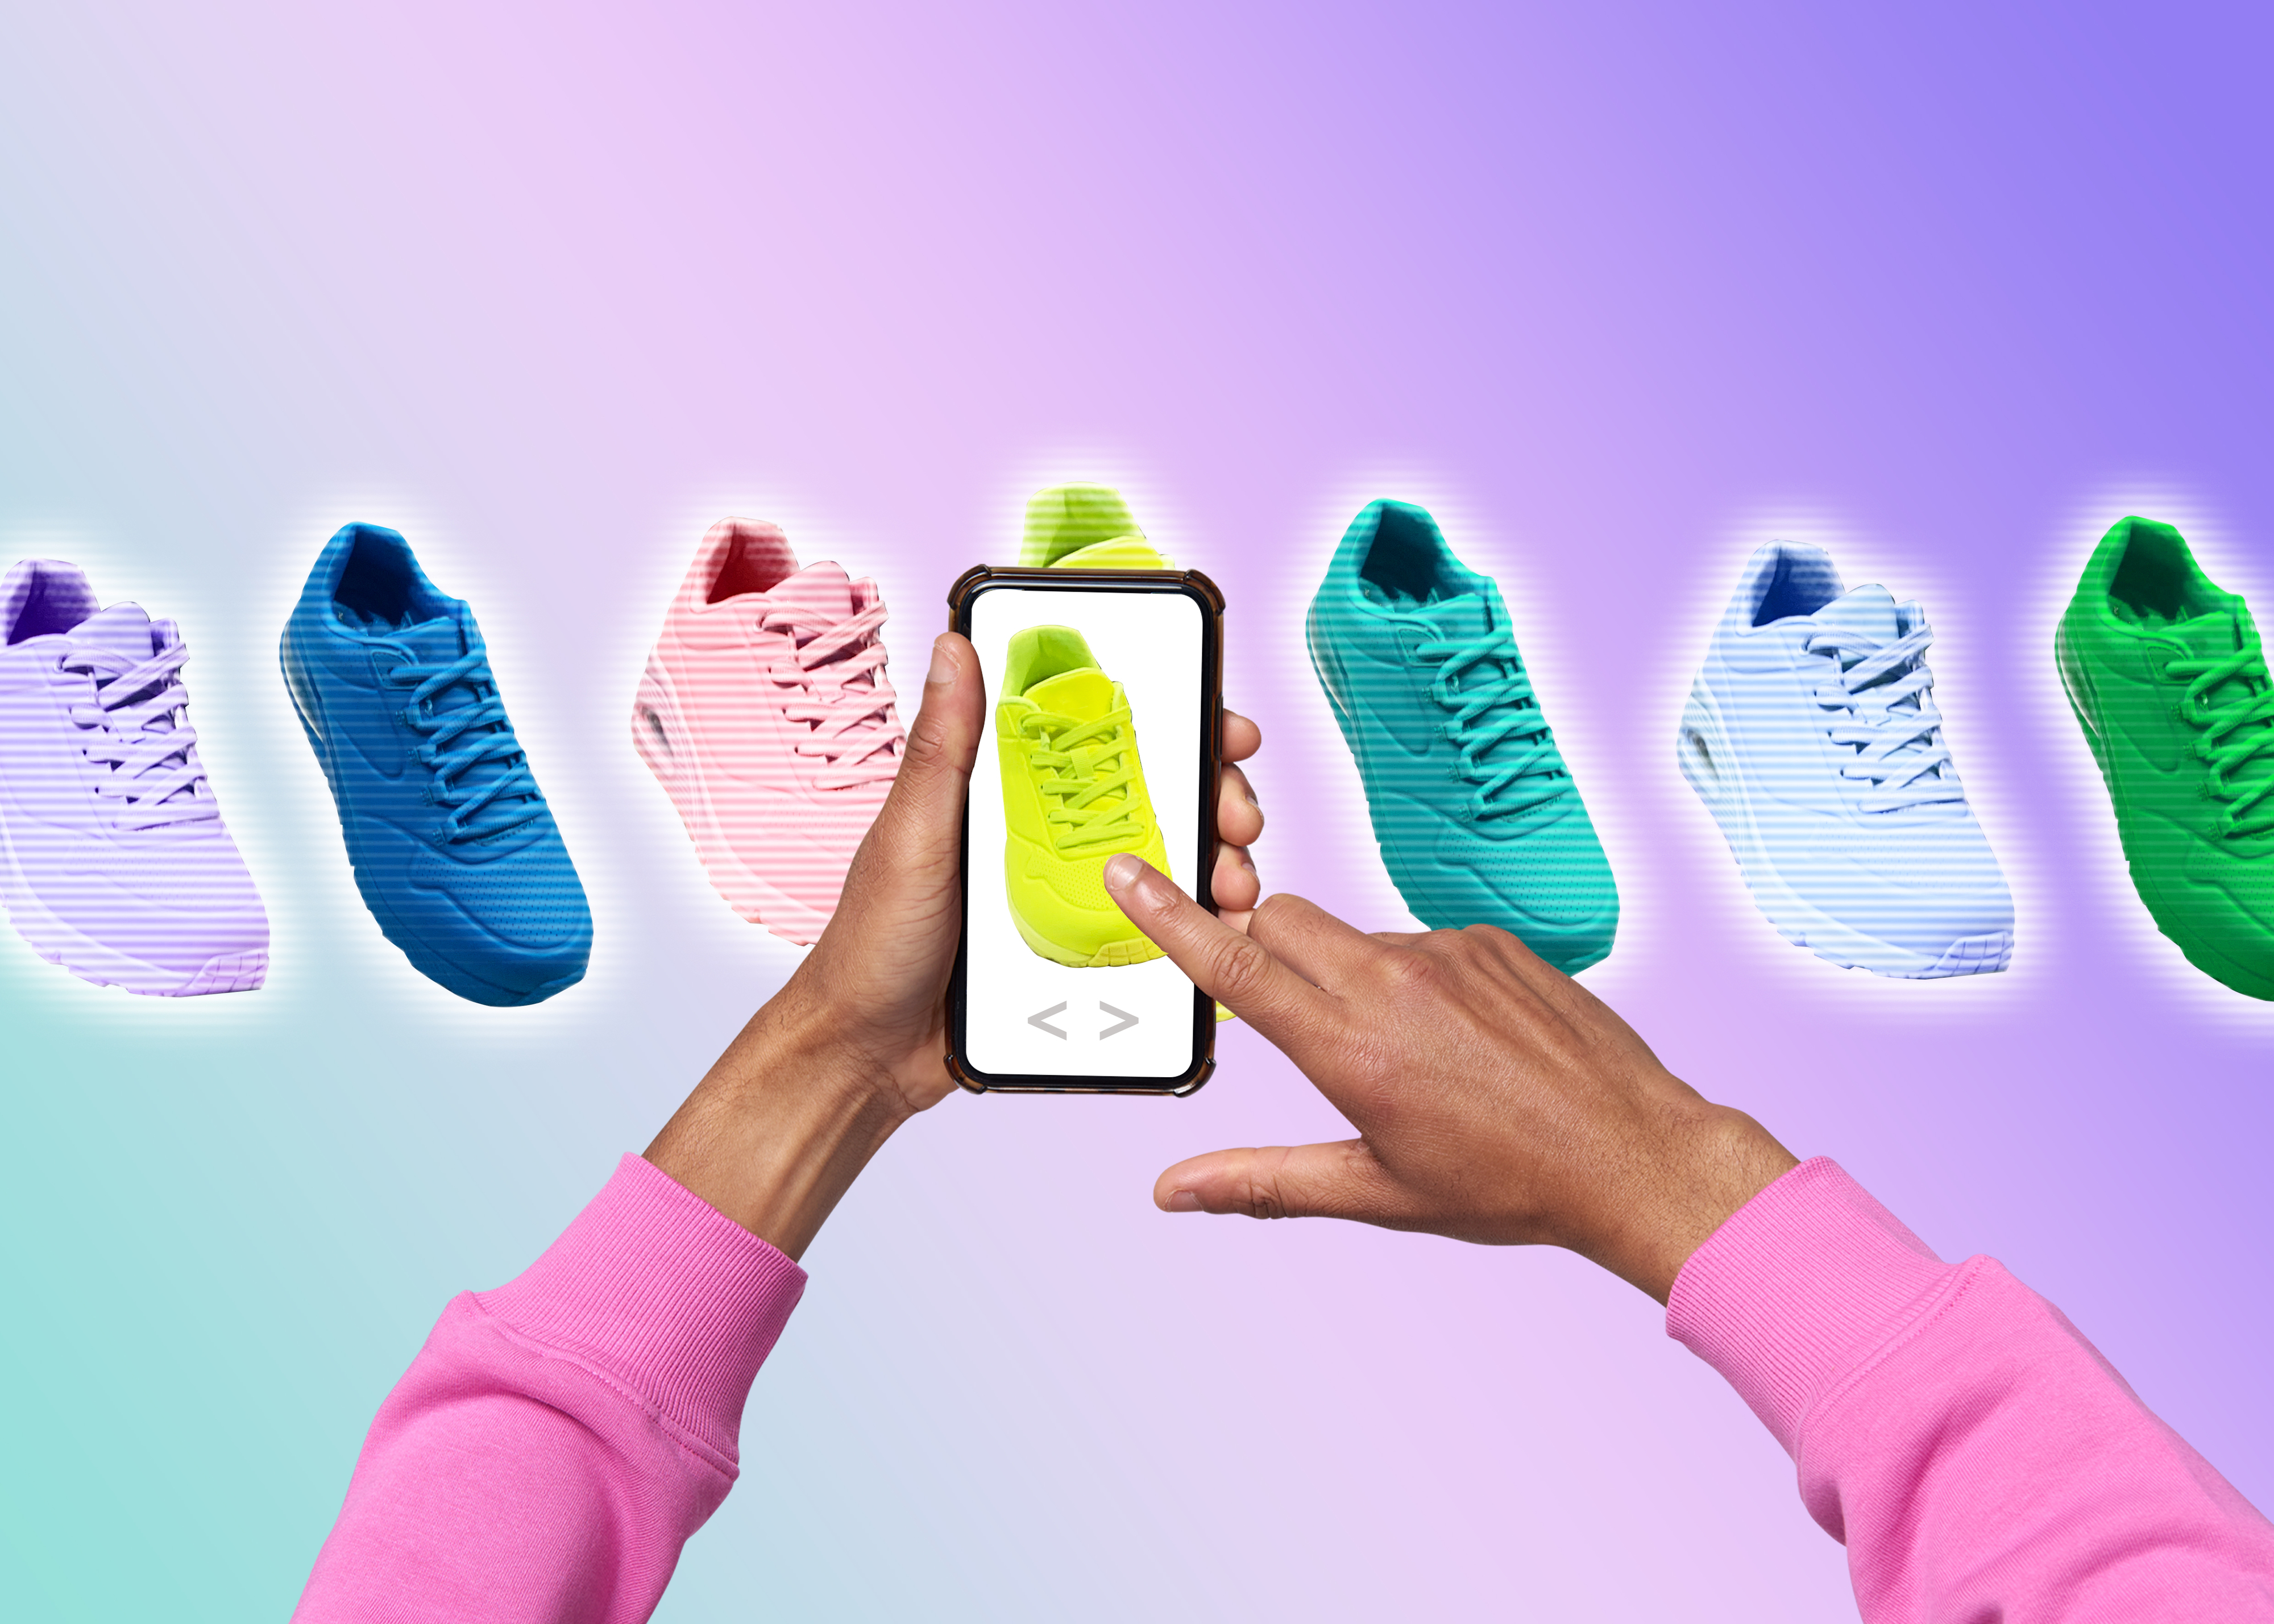 Hands holding a phone displaying a sneaker, with a row of colorful sneakers aligned in the background